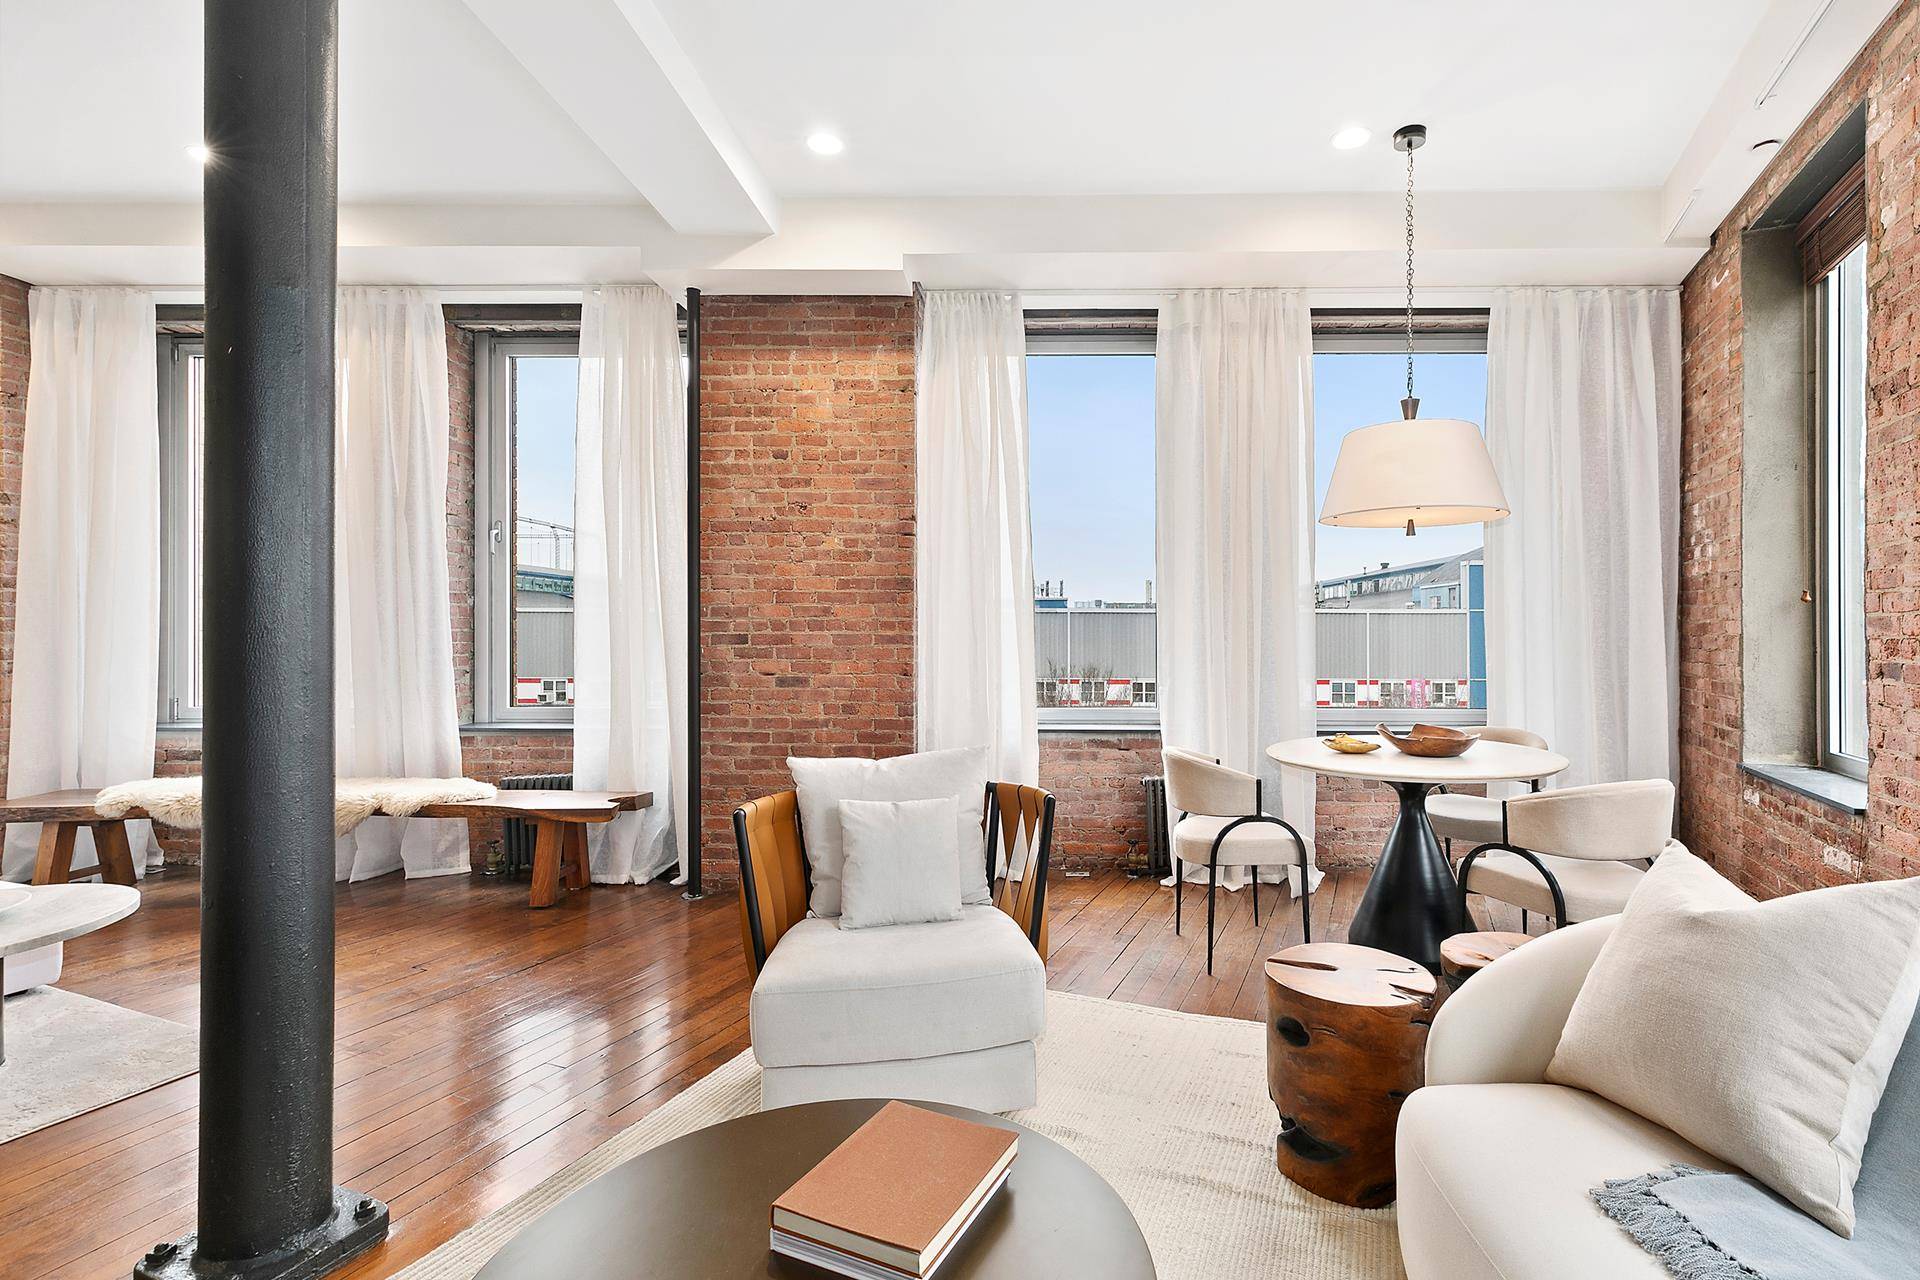 Welcome to wow ! This quintessential light filled downtown Manhattan loft is spacious and expansive with the kind of authentic architectural details only found in such coveted industrial buildings as ...